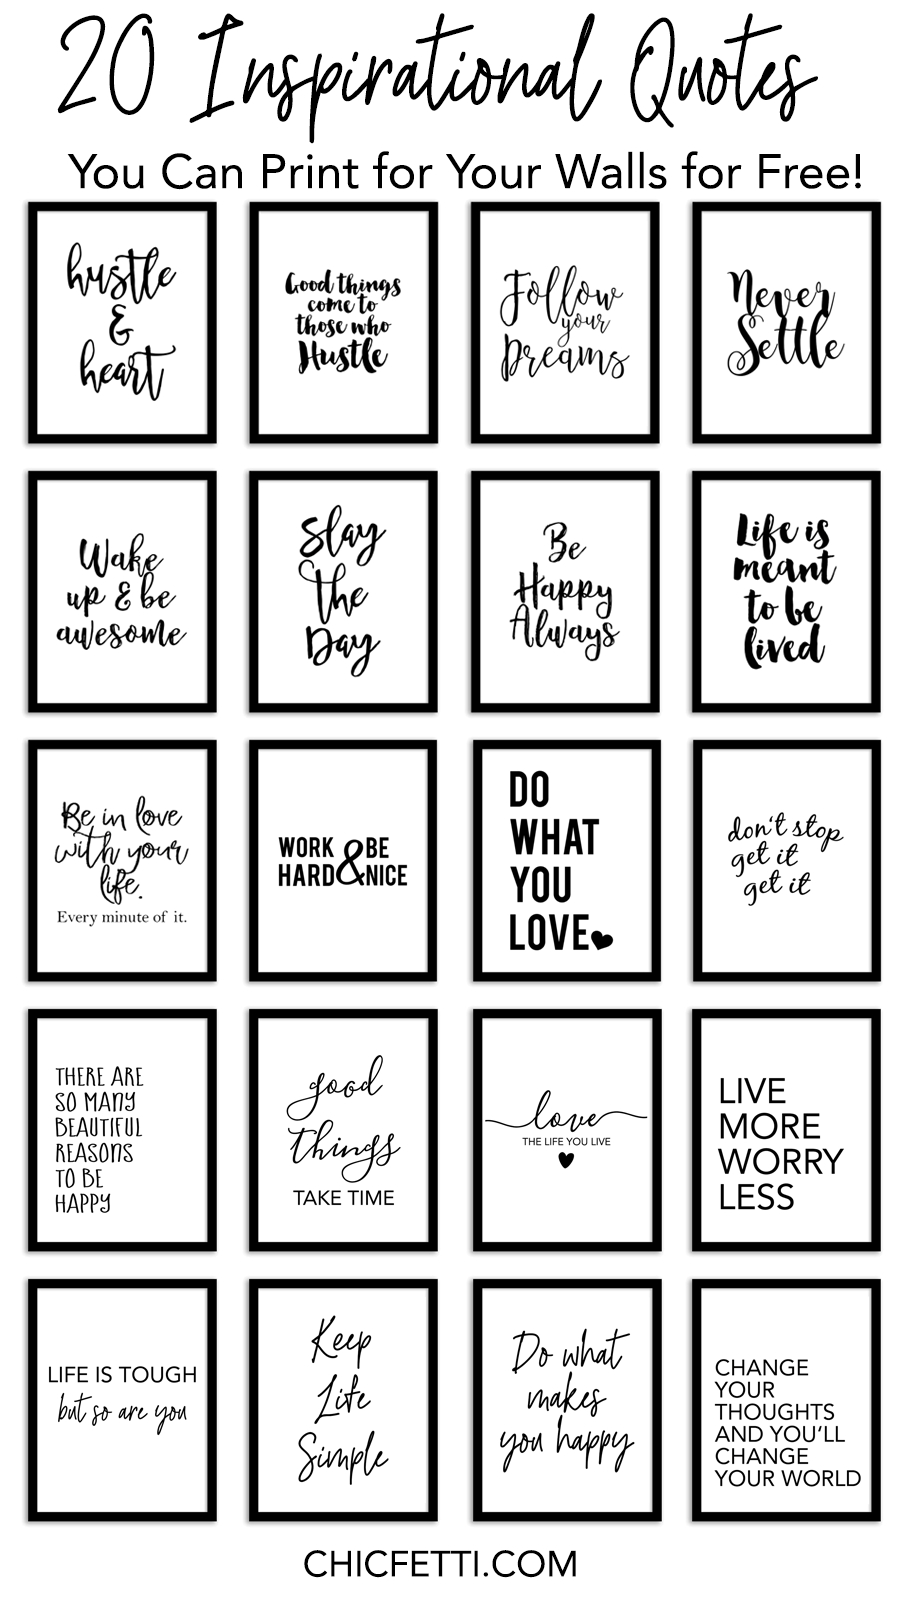 20 Inspirational Quotes You Can Print For Your Walls For Free - Free Printable Quotes